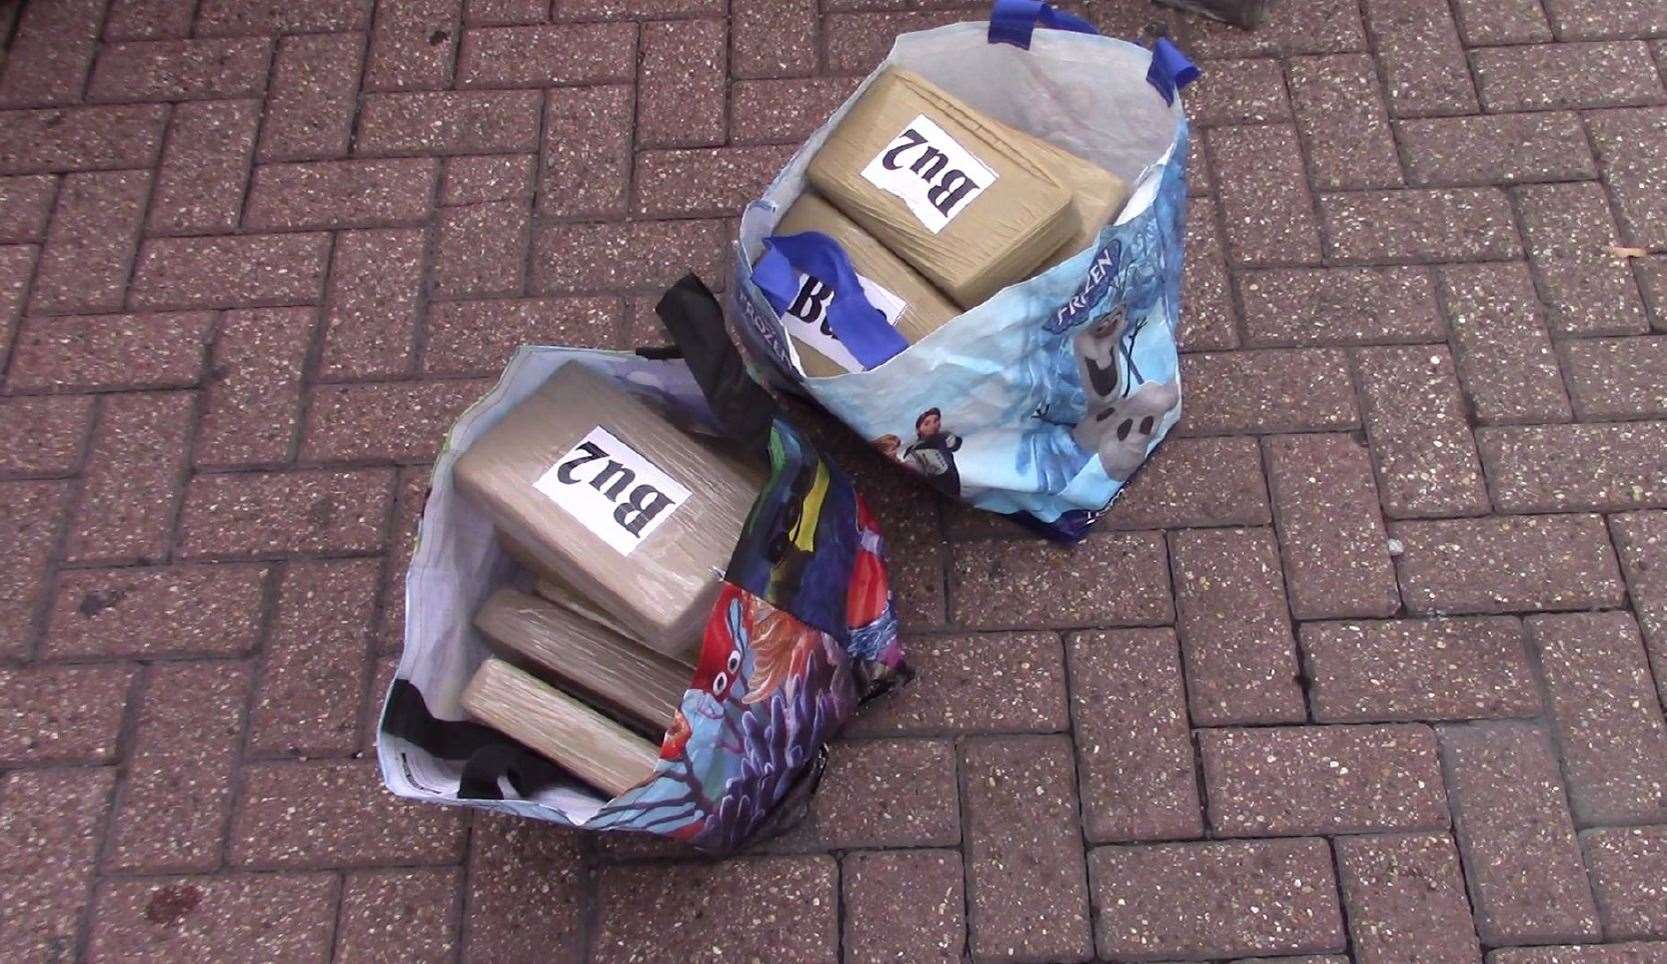 £1.2million worth of drugs were seized on the M25 Dartford Crossing. Picture: NCA